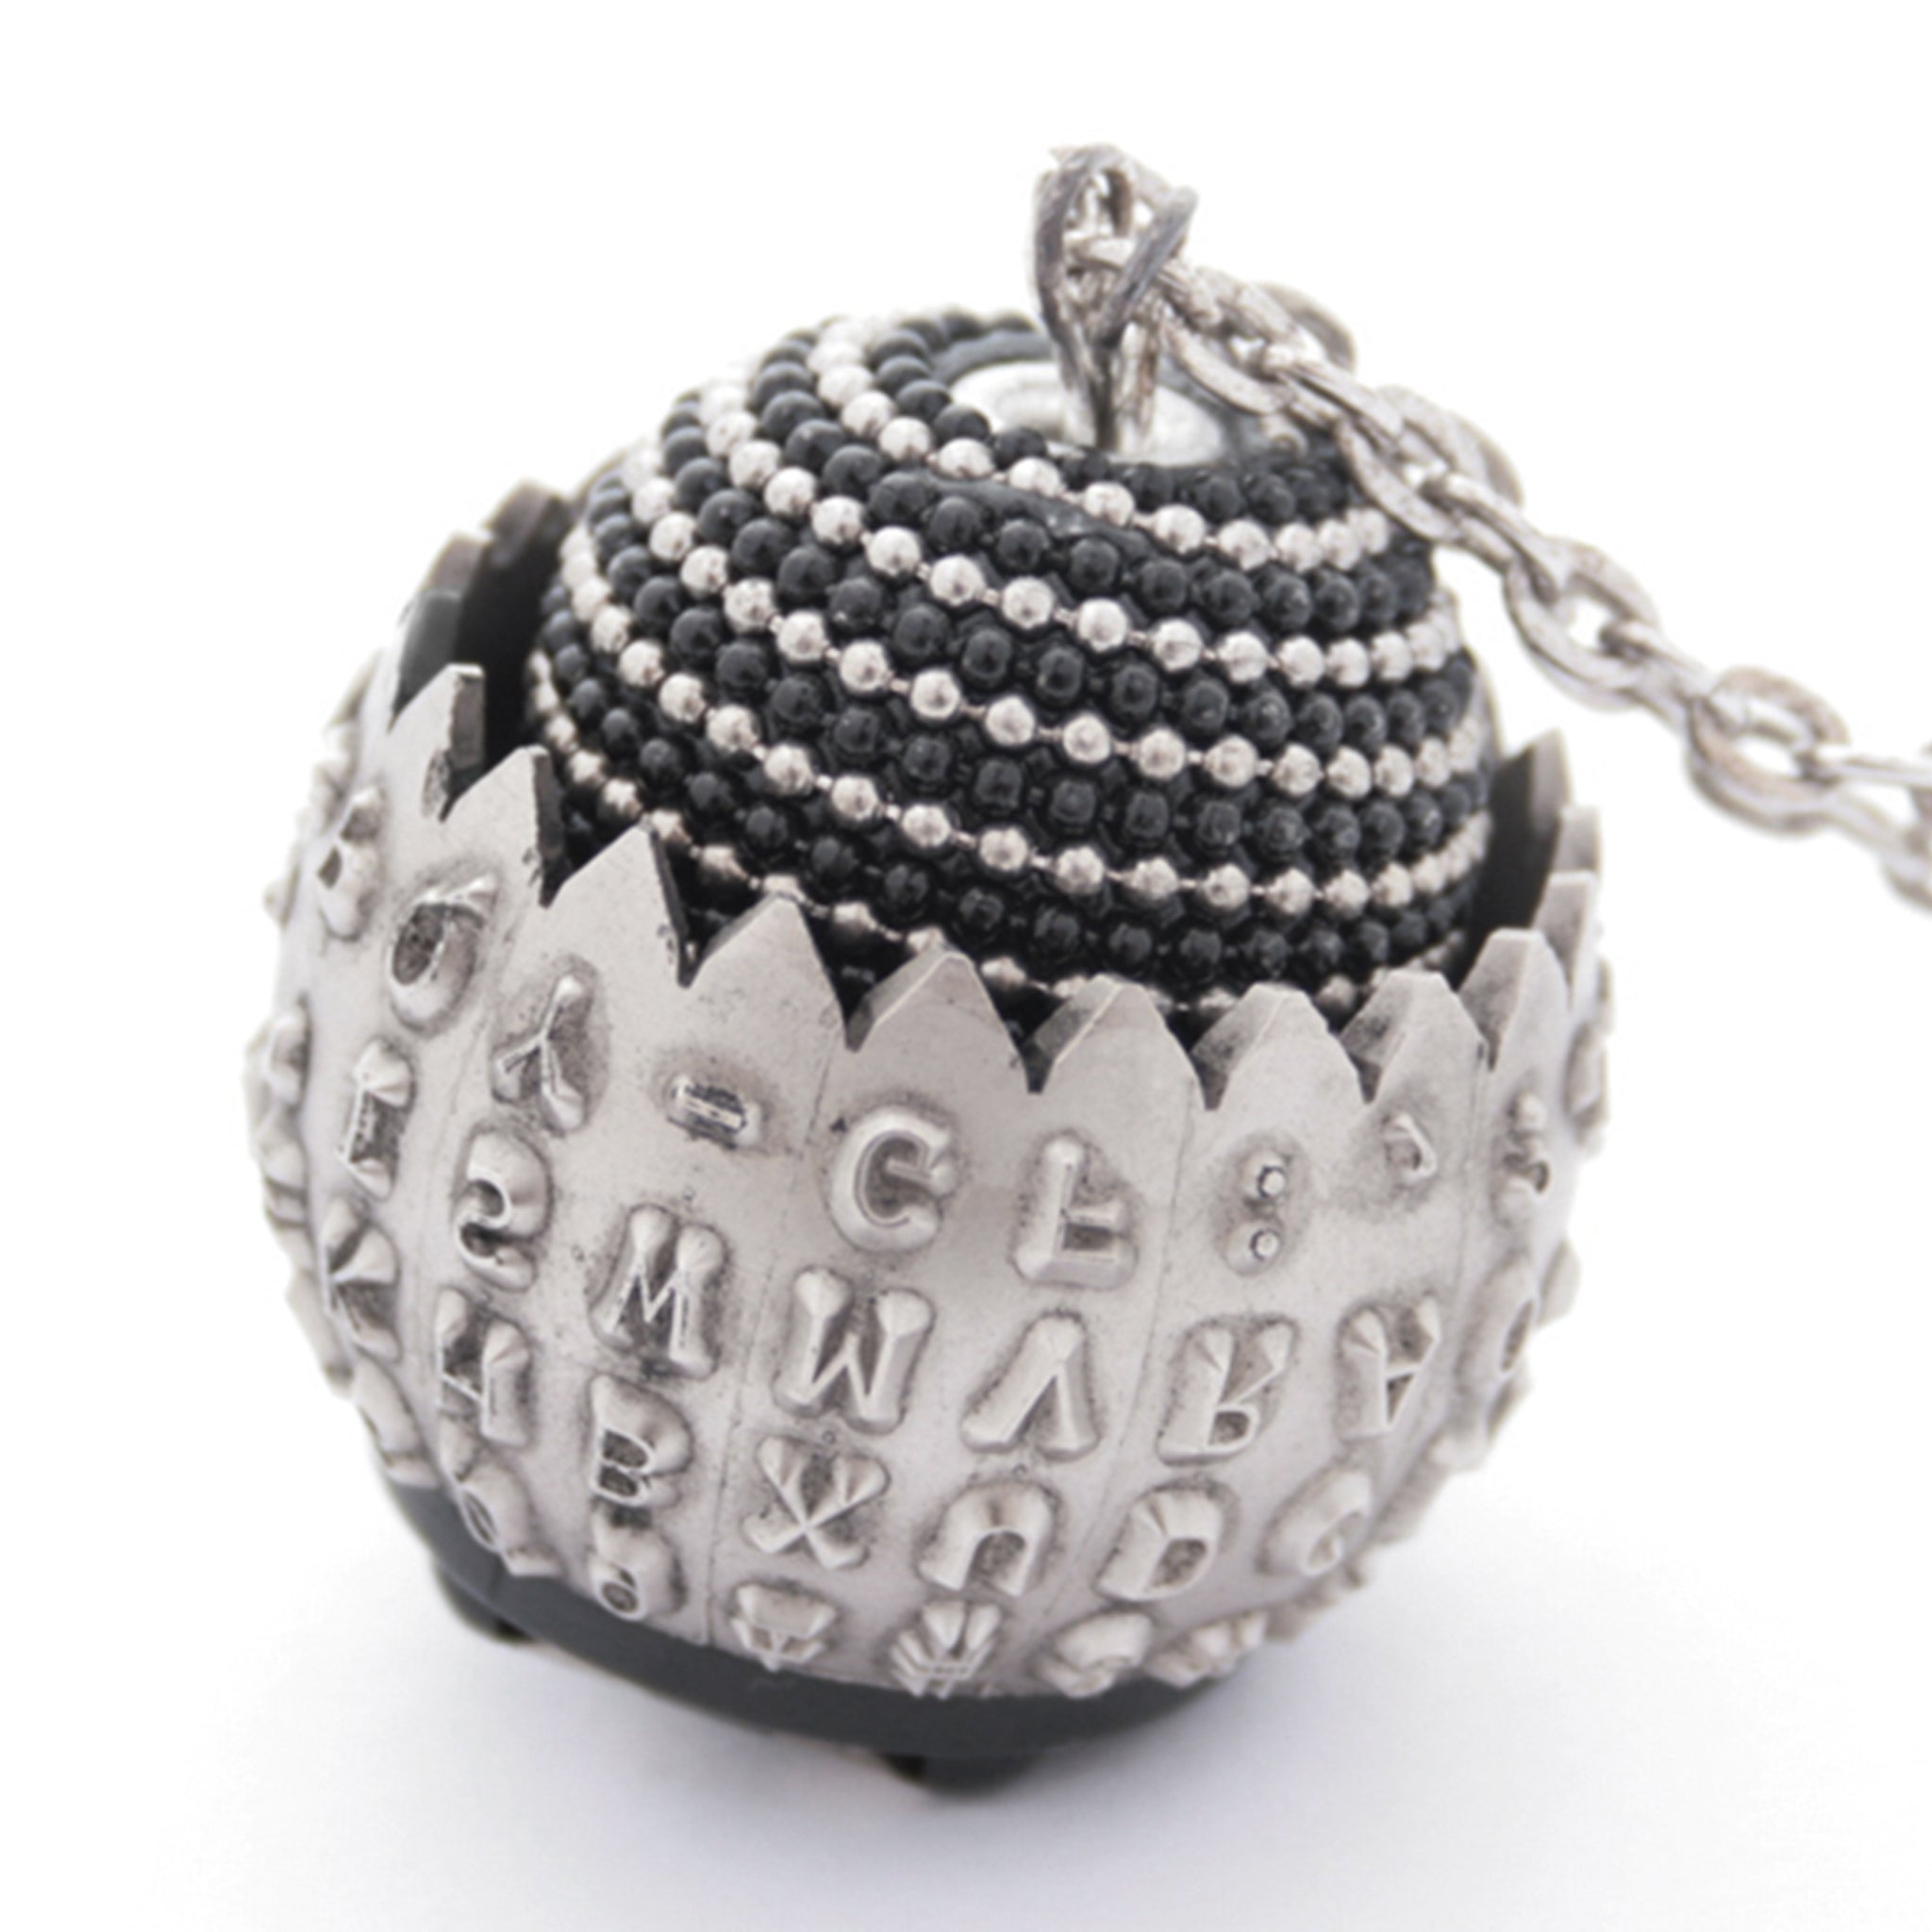 IBM Selectric typewriter font ball with large metal bead turned into eye catching necklace